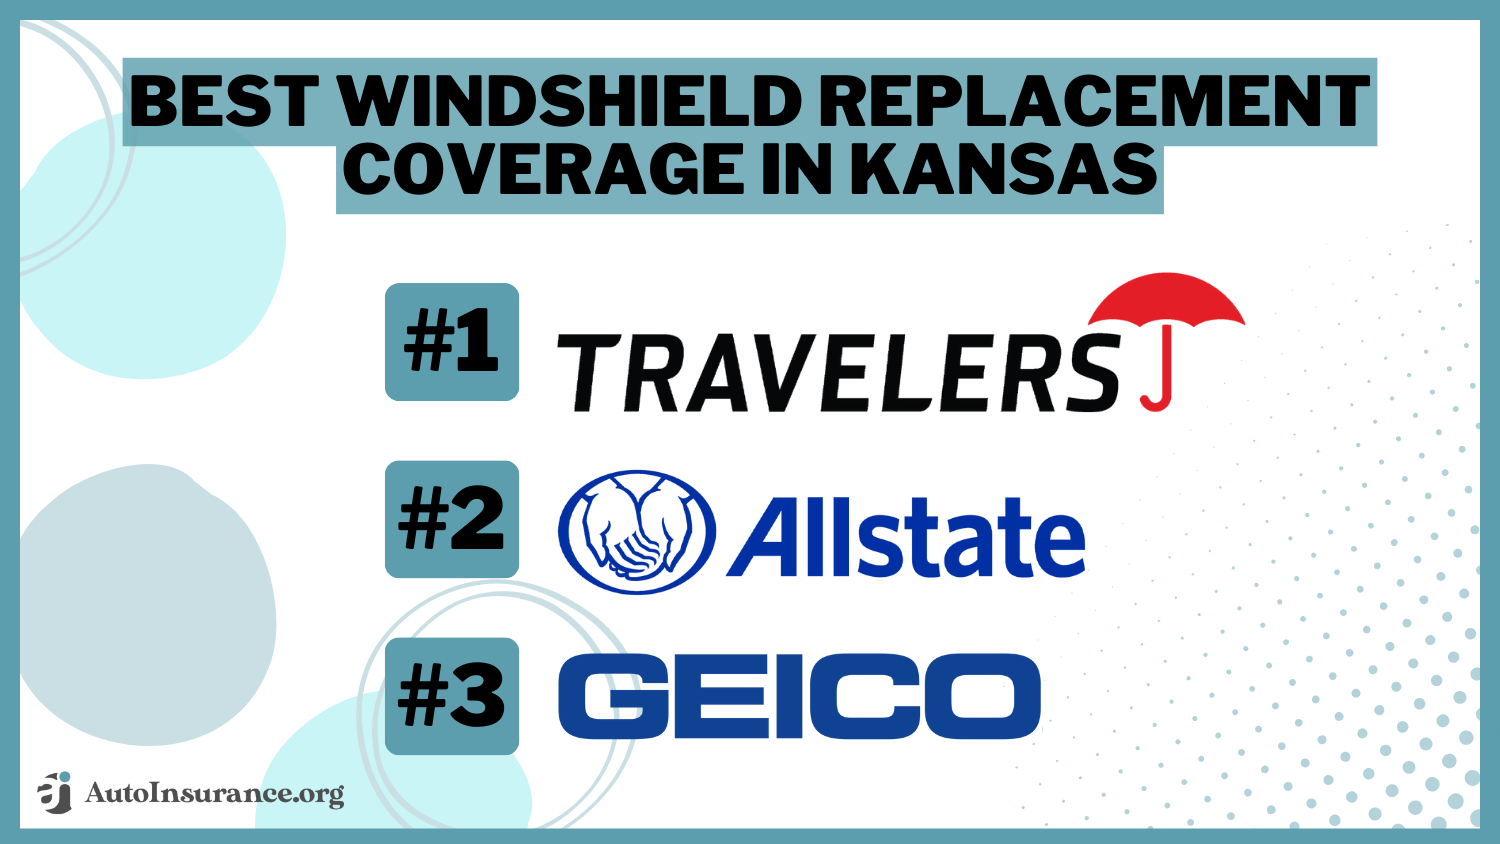 Best Windshield Replacement Coverage in Kansas: Travelers, Allstate, and Geico